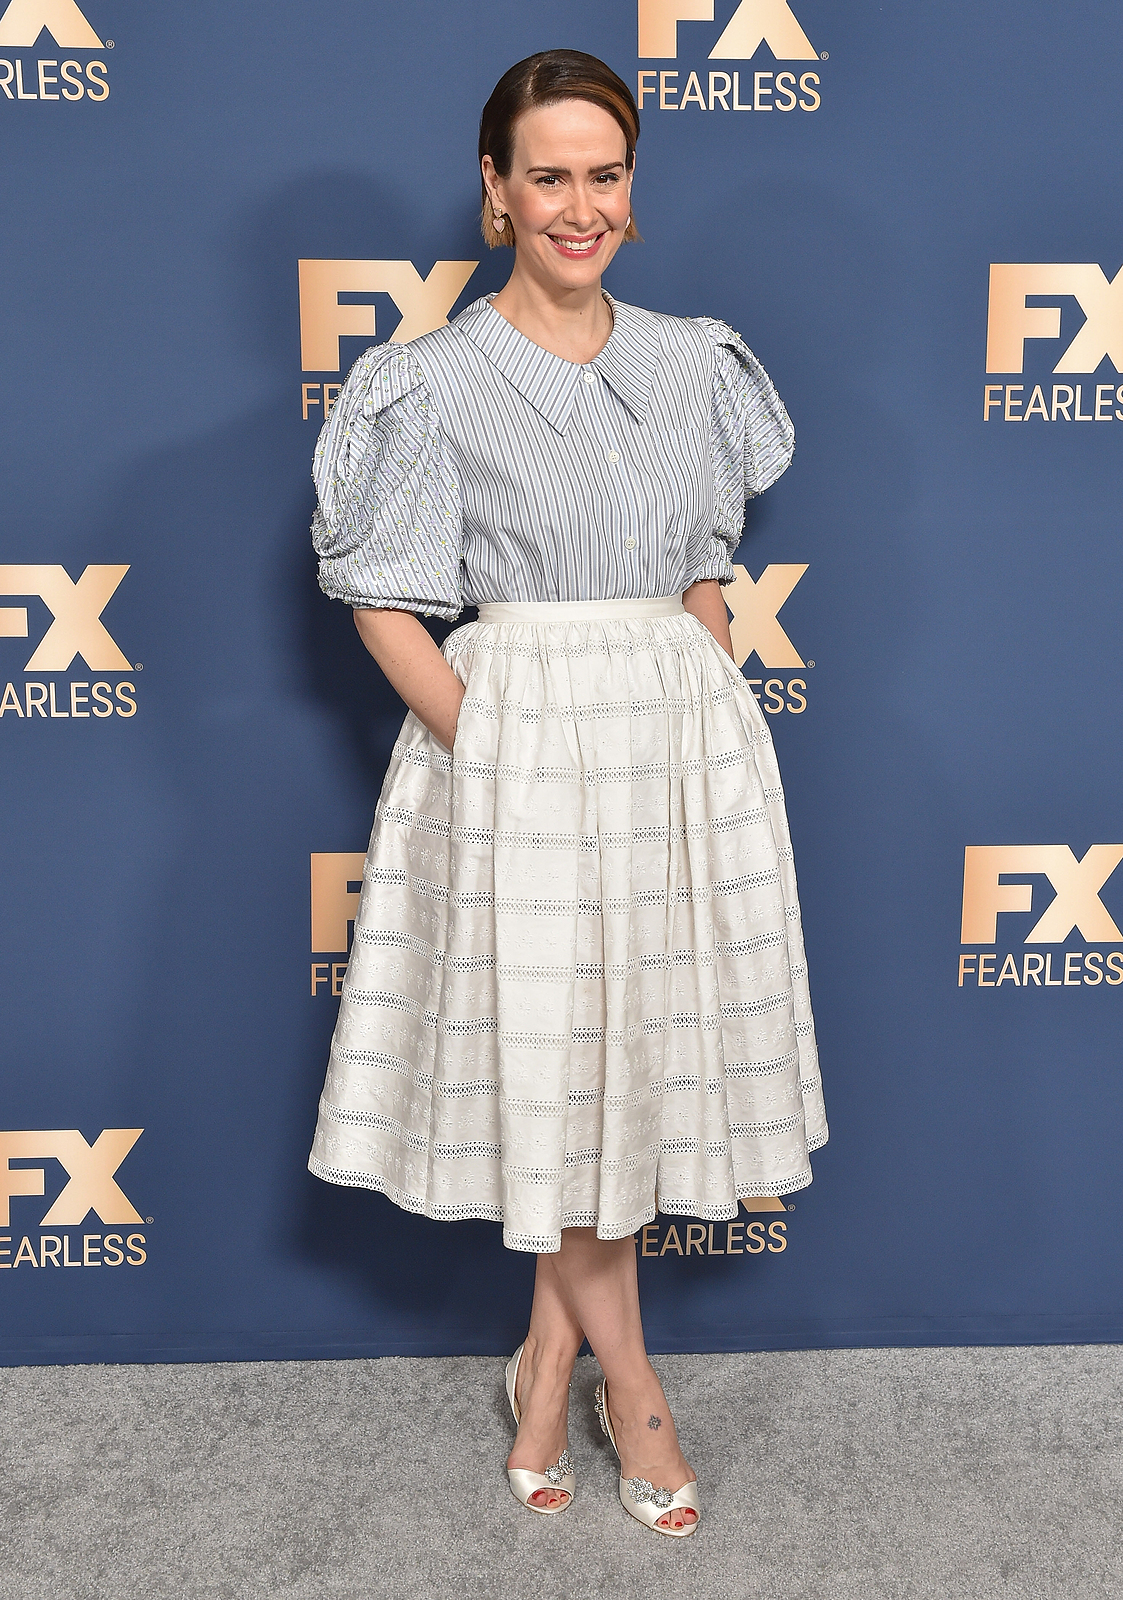 Sarah Paulson at a carpet event with her hands inside her dress pockets and smiling.